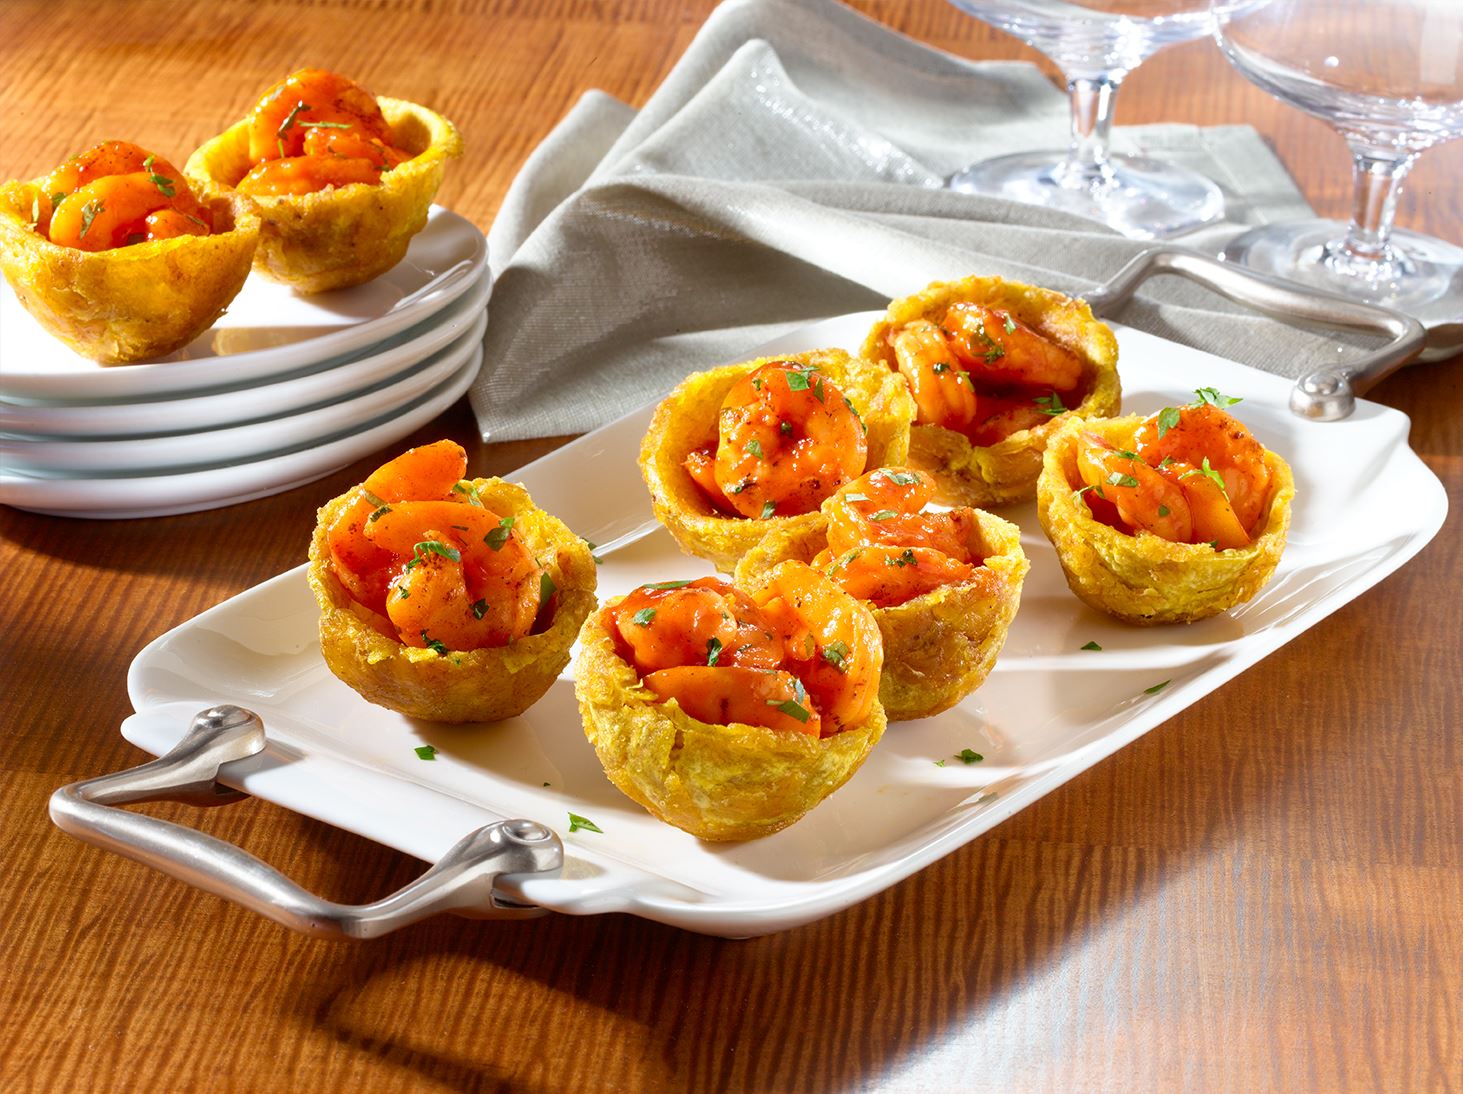 Assemble the Tostones Rellenos with seafood